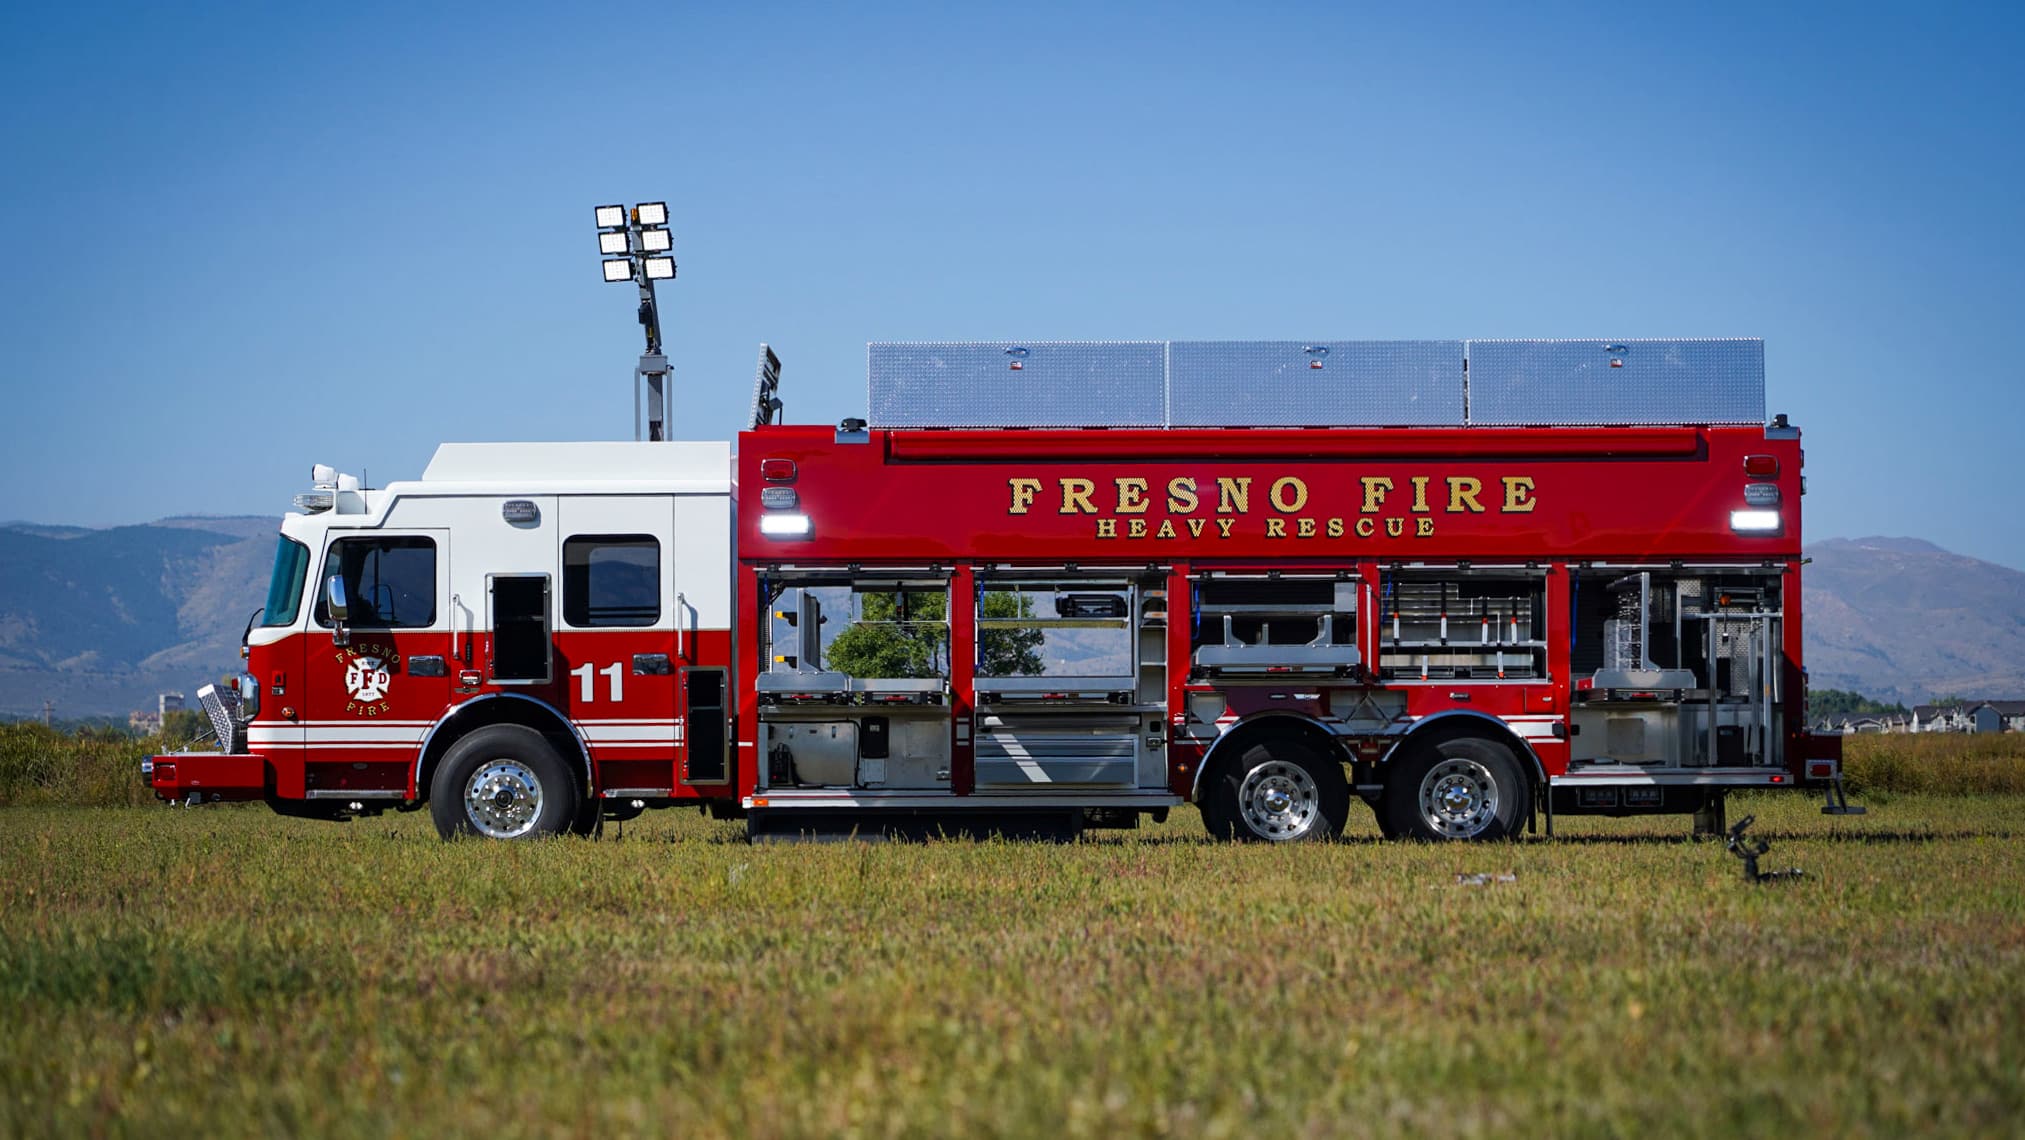 Featured image for “Fresno Fire Department, Fresno (CA) HR #1228”